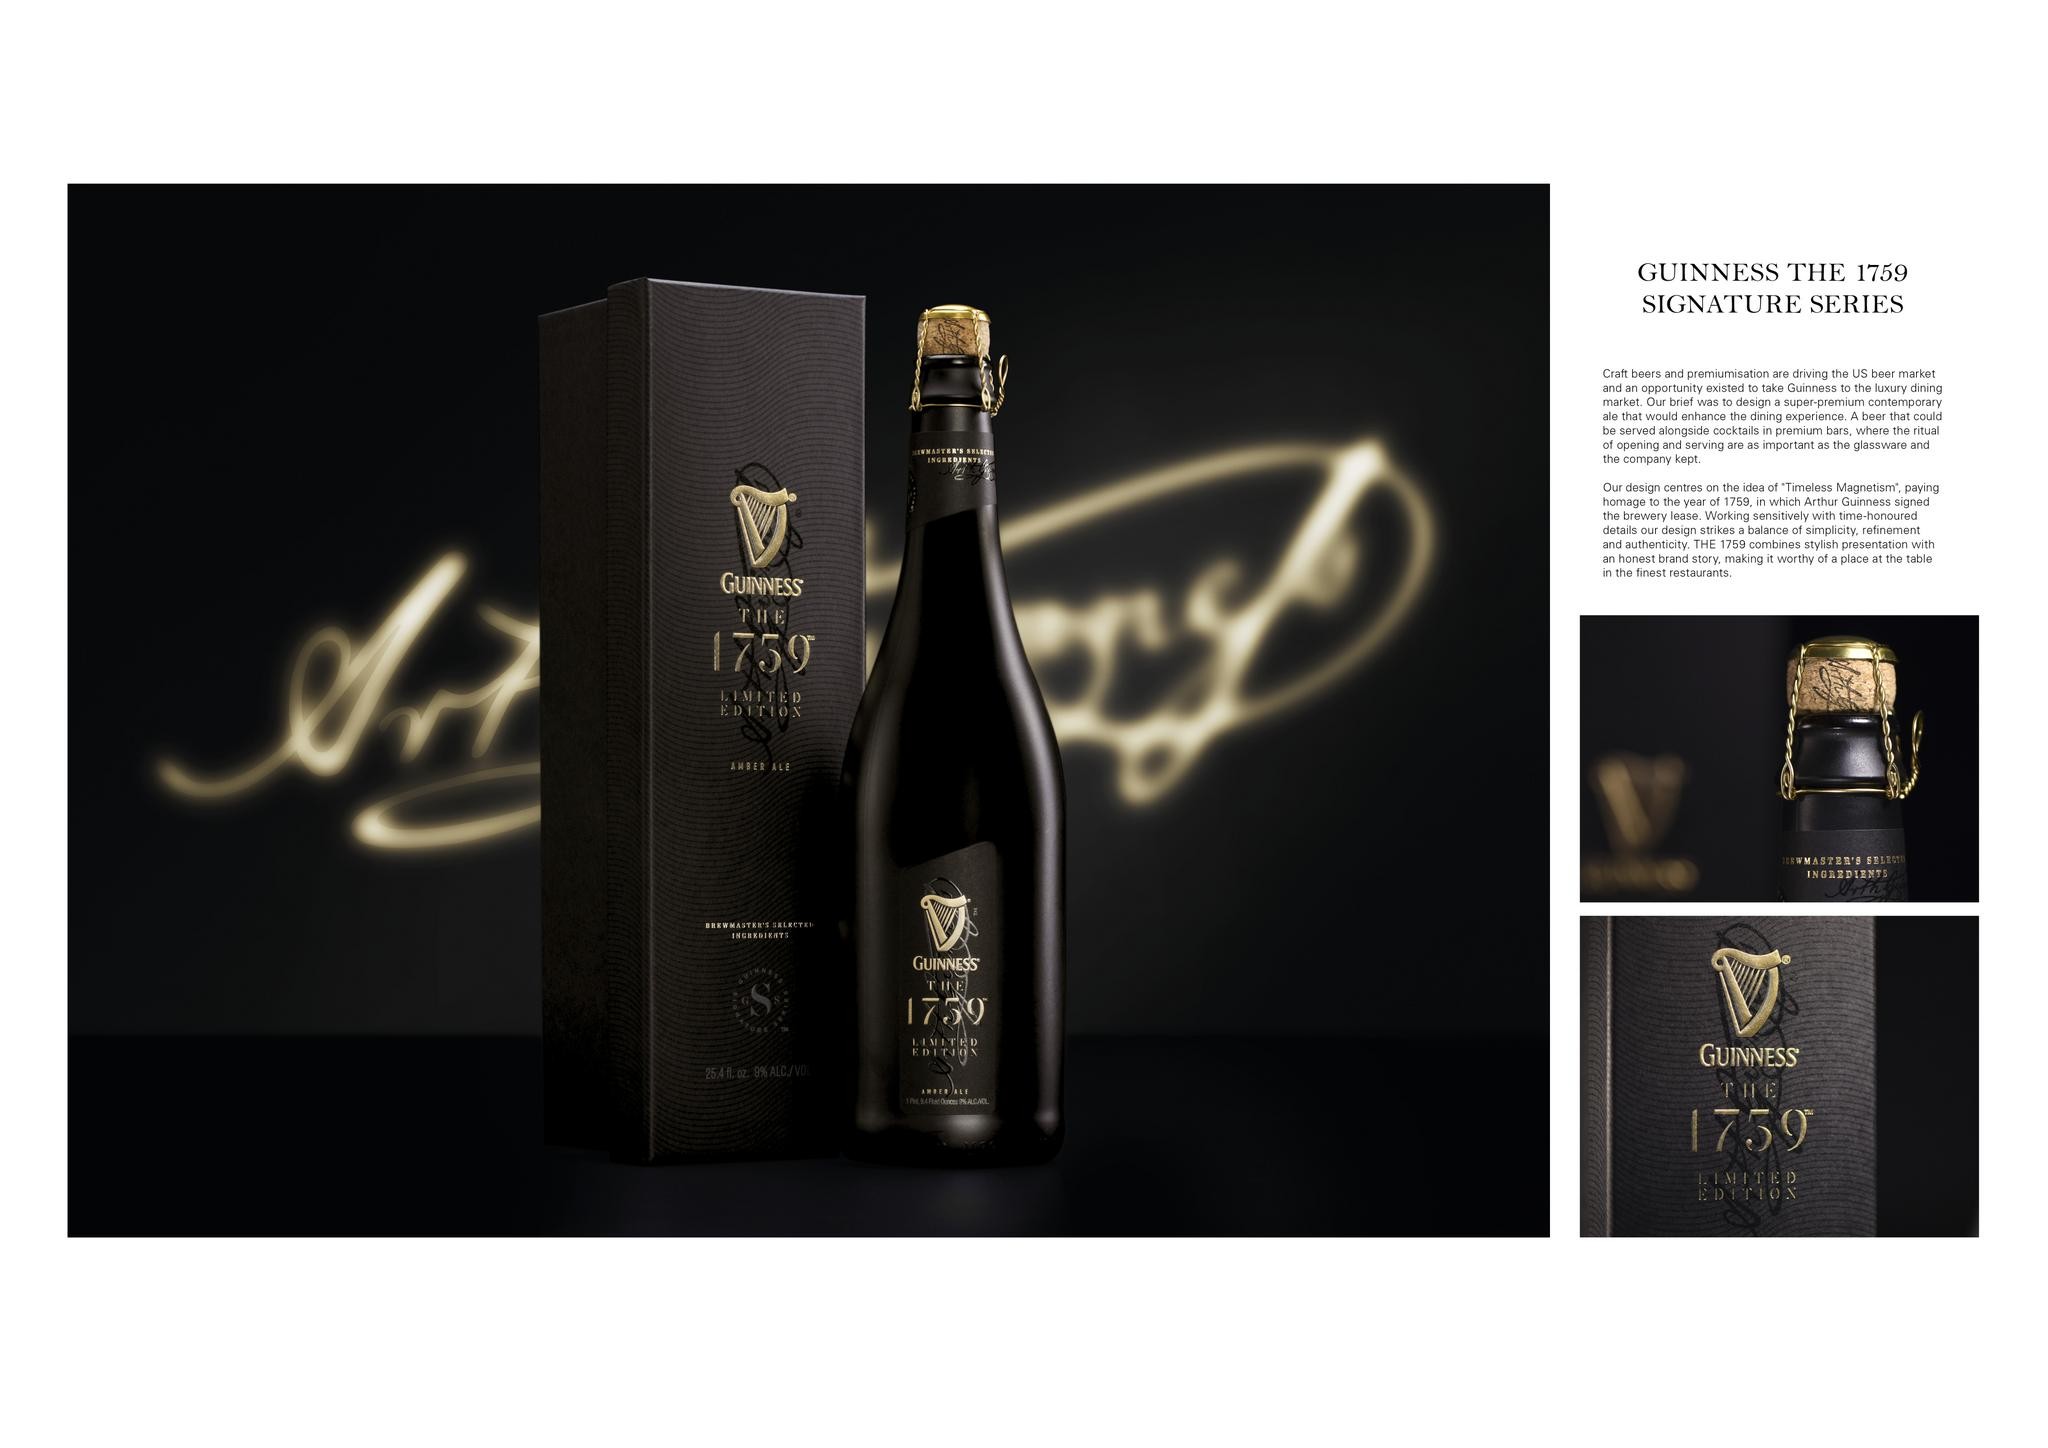 GUINNESS THE 1759 SIGNATURE SERIES